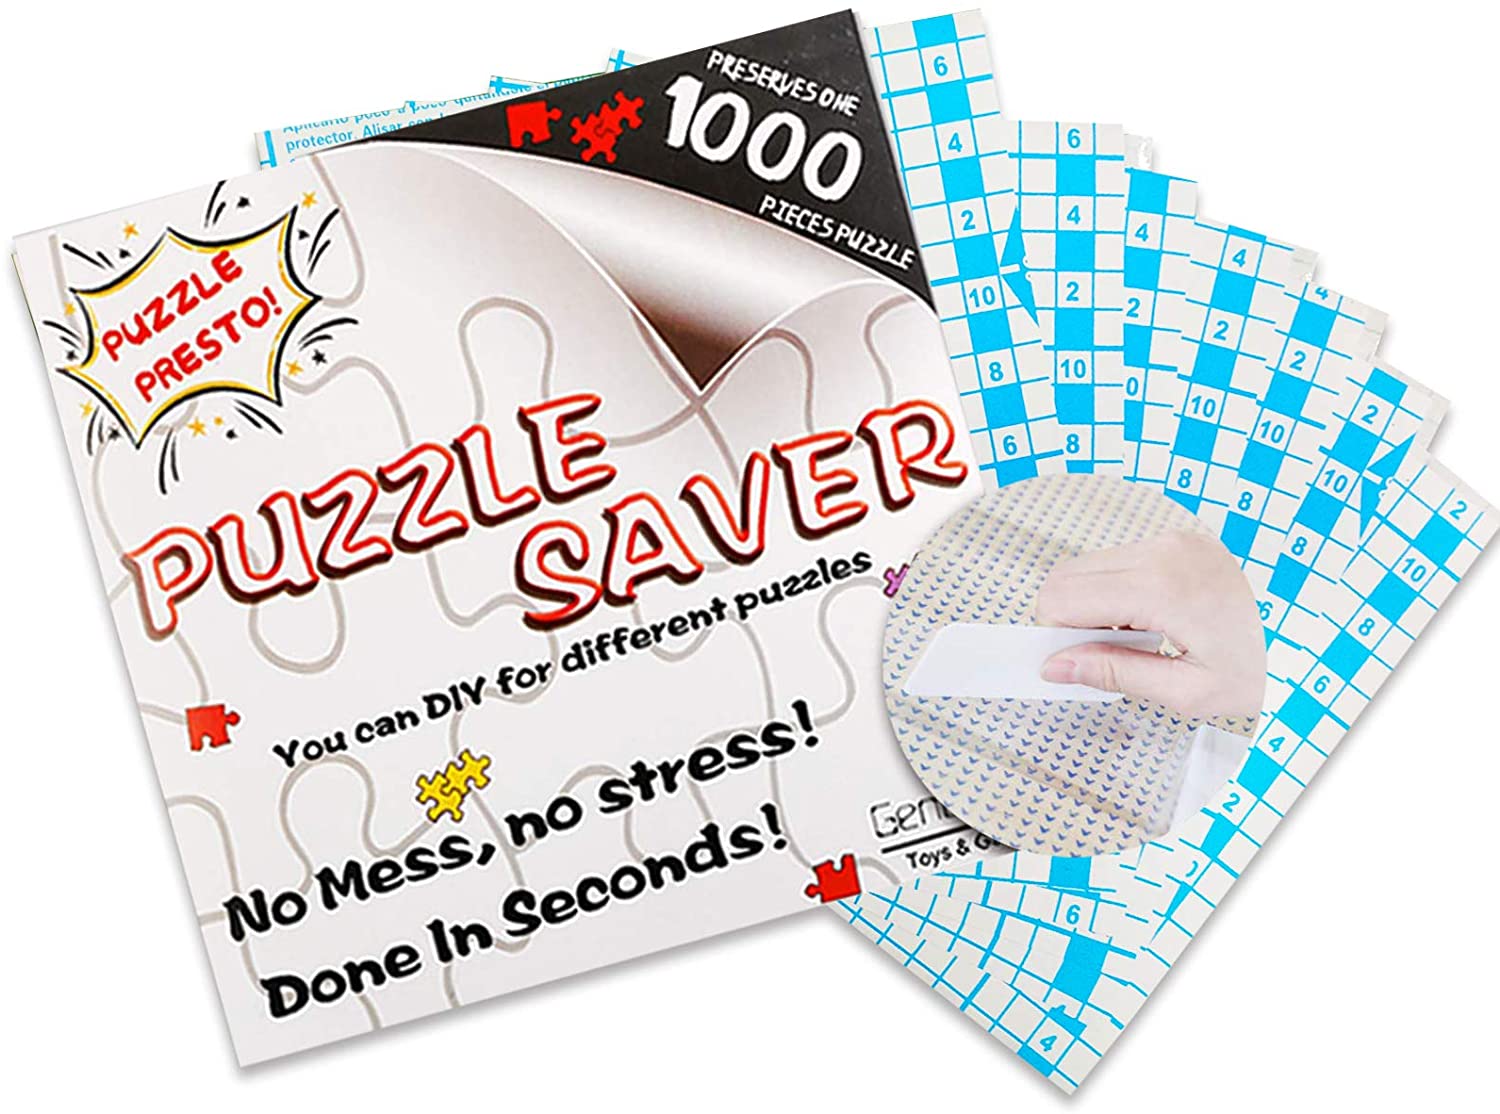 Puzzle Sticker 1000pcs Jigsaw Large Clear Peel Glue Sheets Backing Adhesive UN3F 